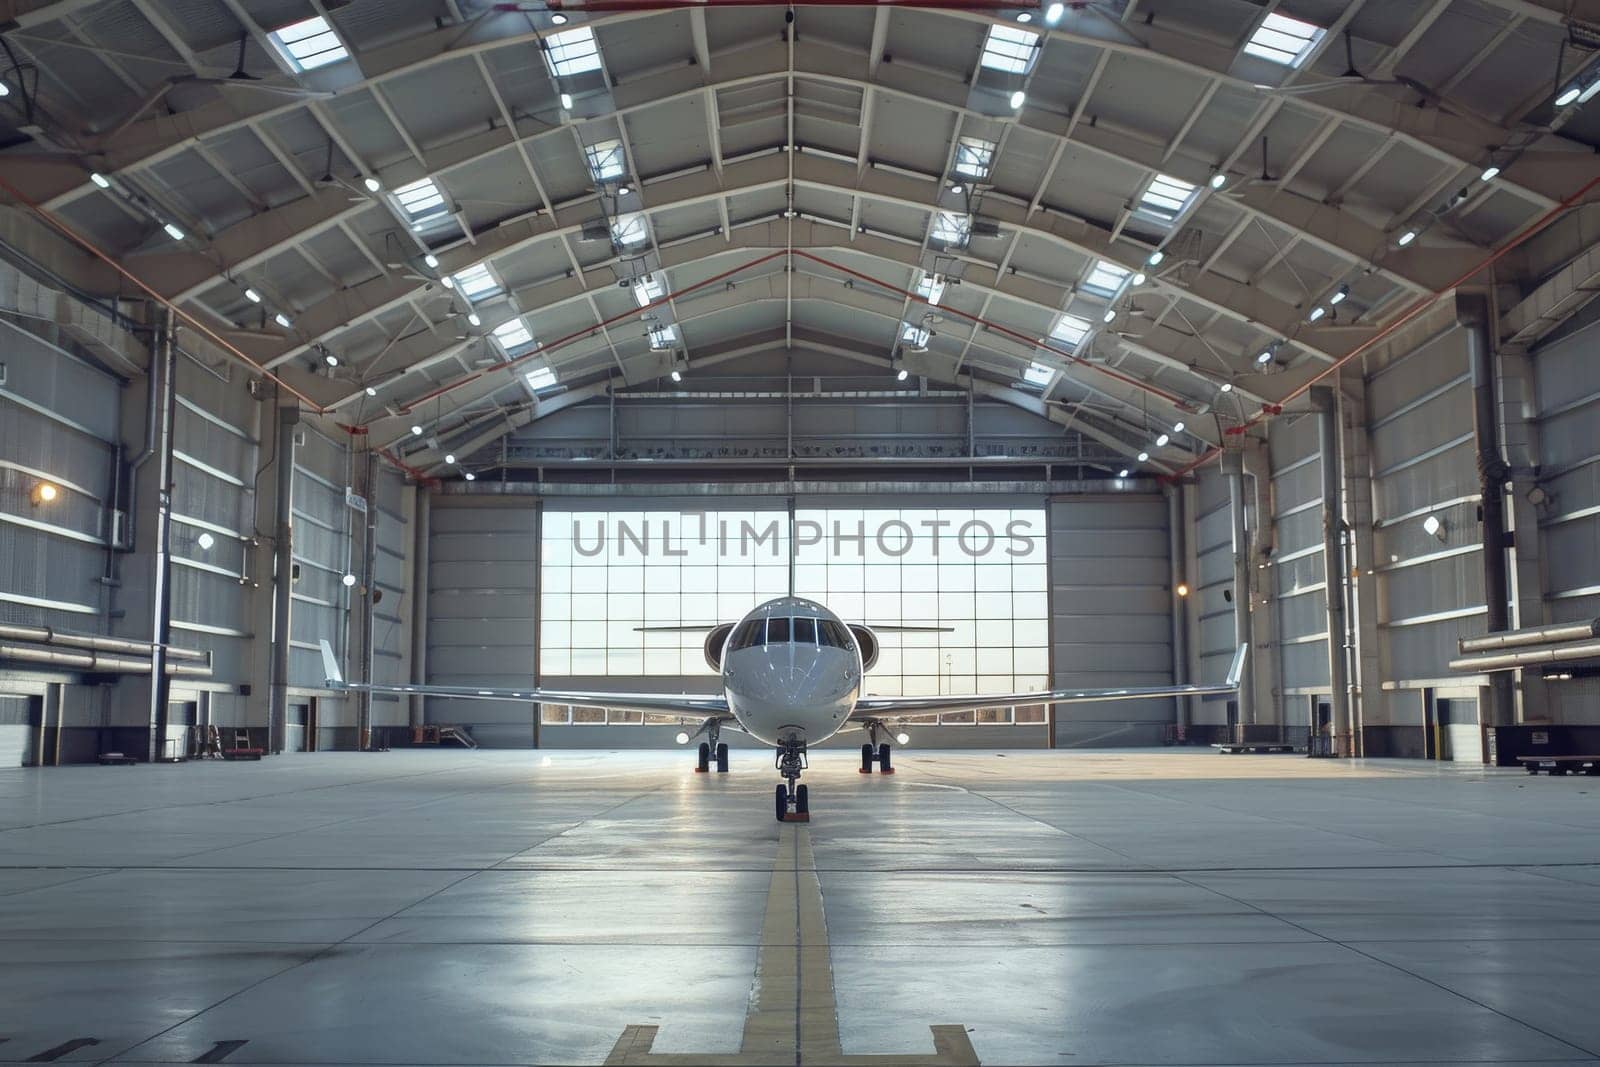 A white plane is sitting in a large hangar. The hangar is empty and the plane is the only thing visible